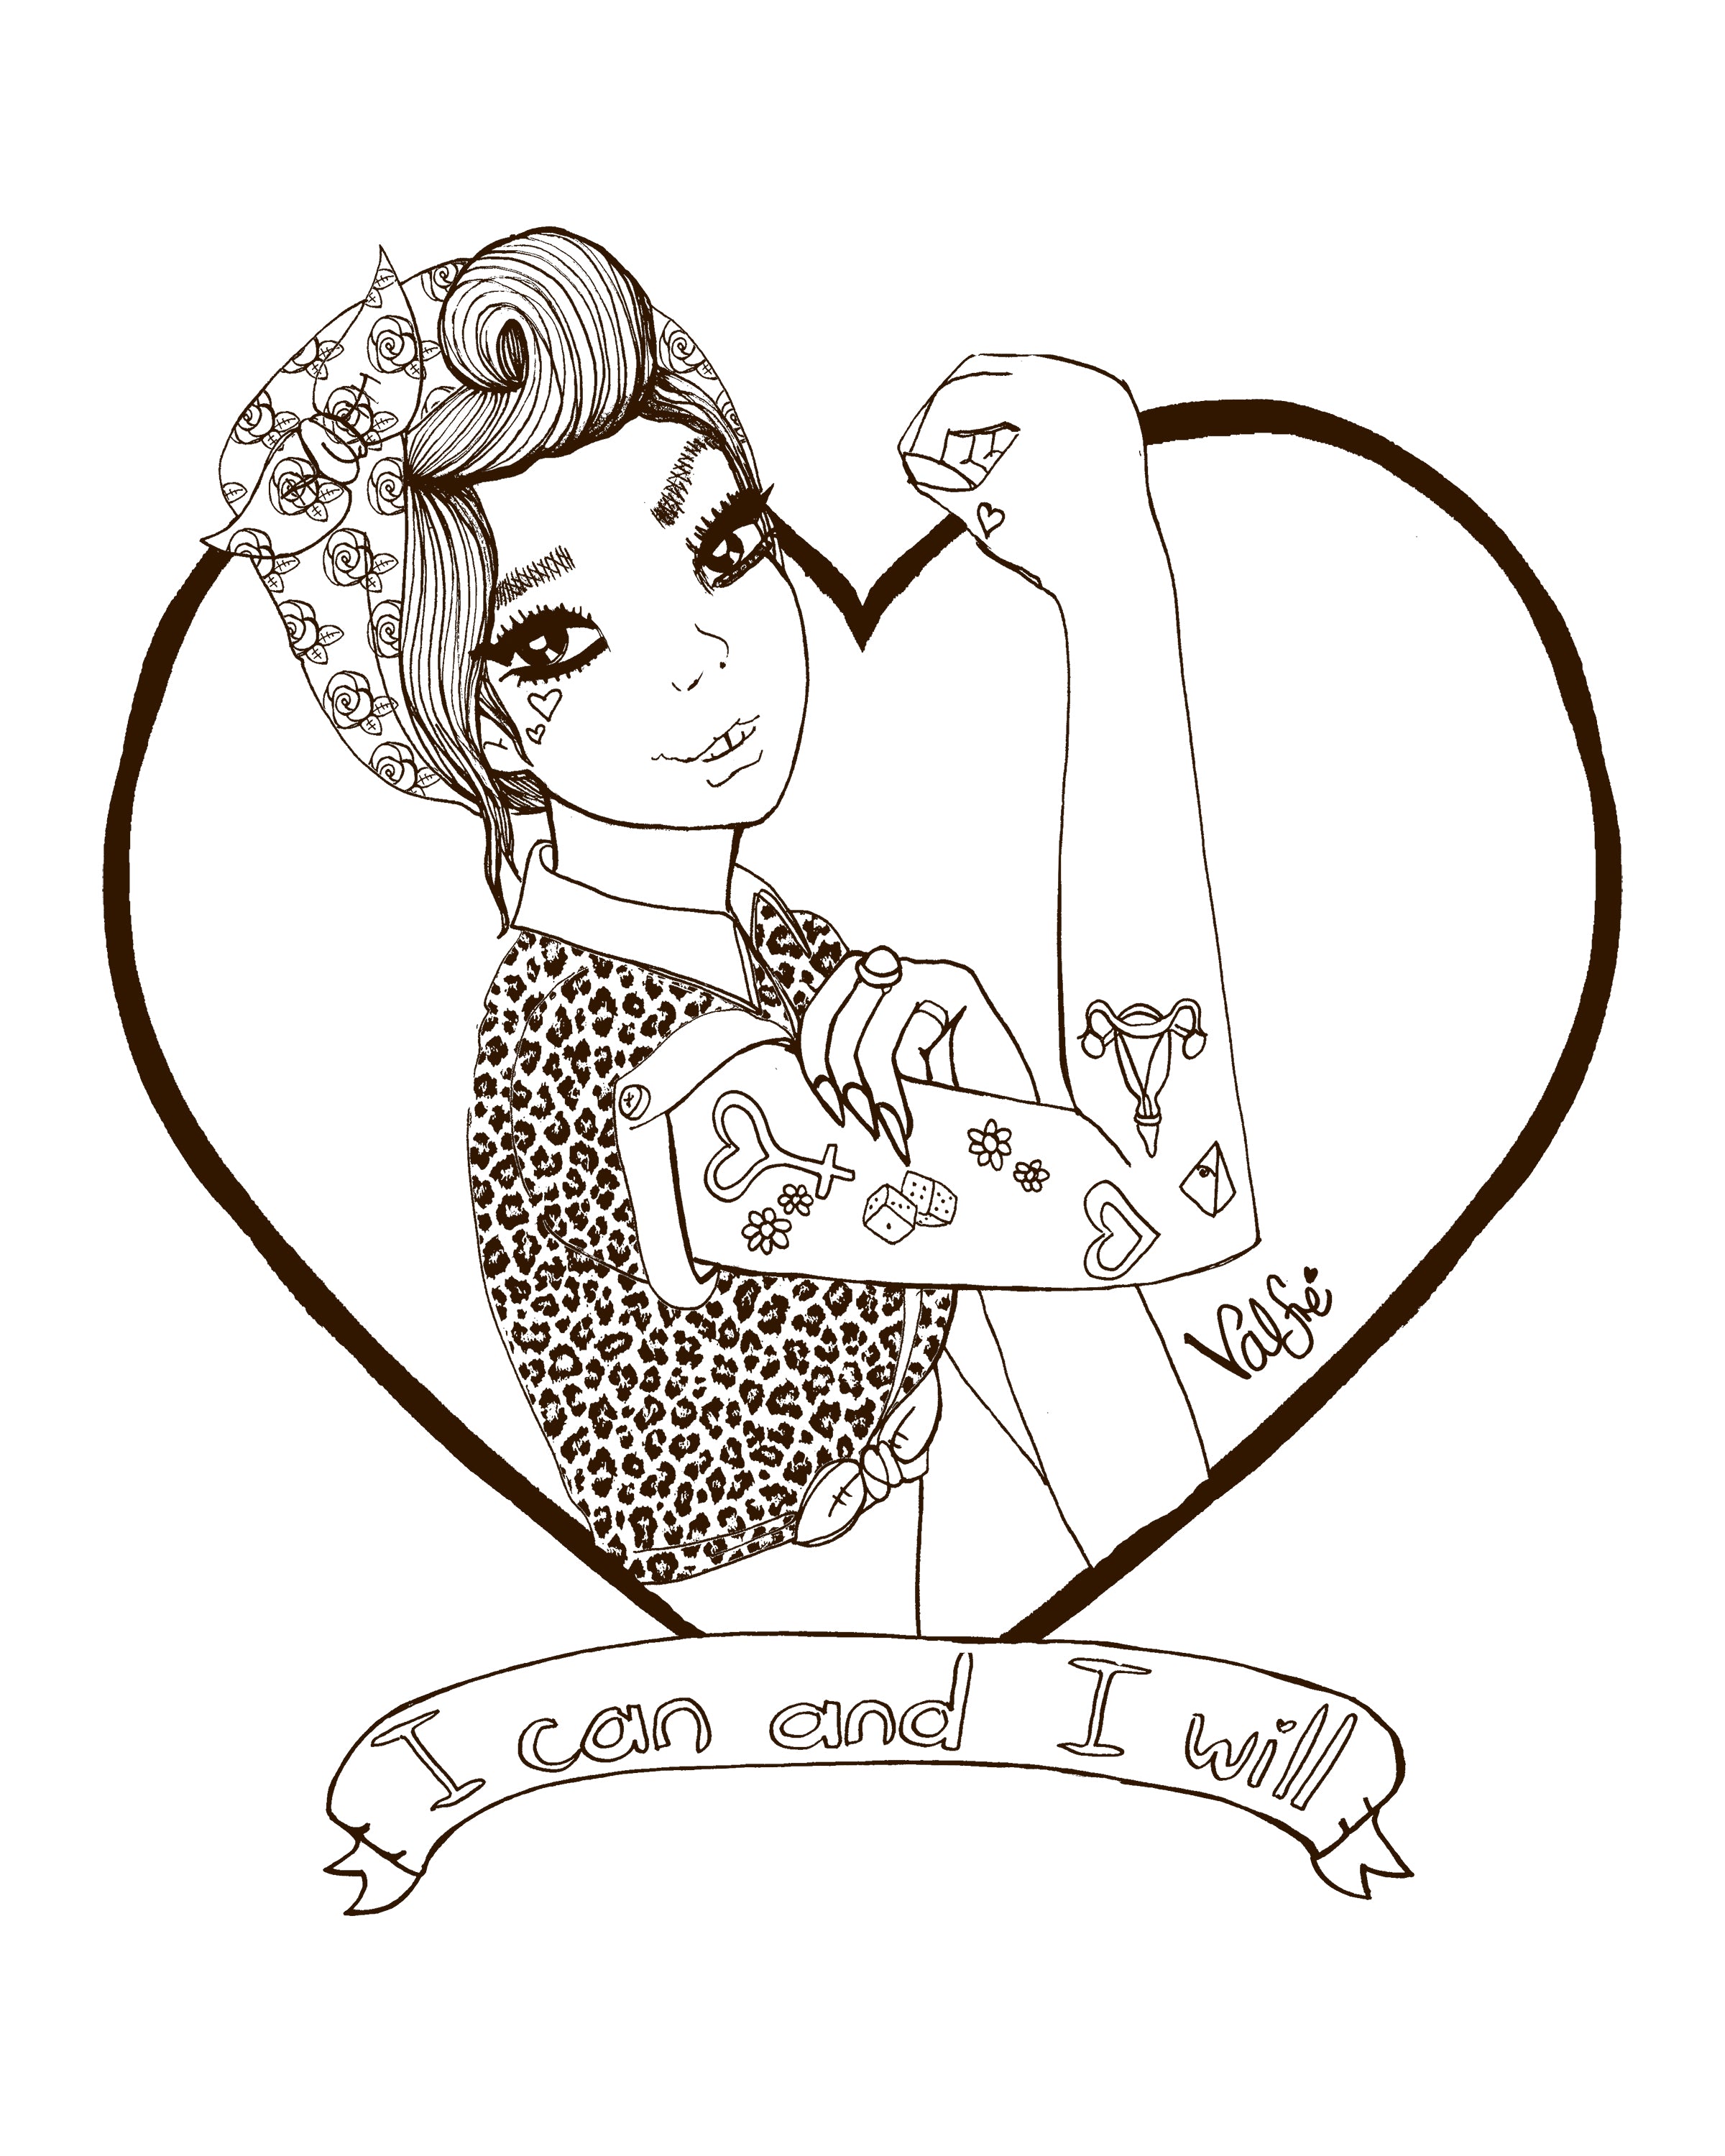 Download #ValfreColorMe: Women's Month Themed Coloring Pages - Valfré